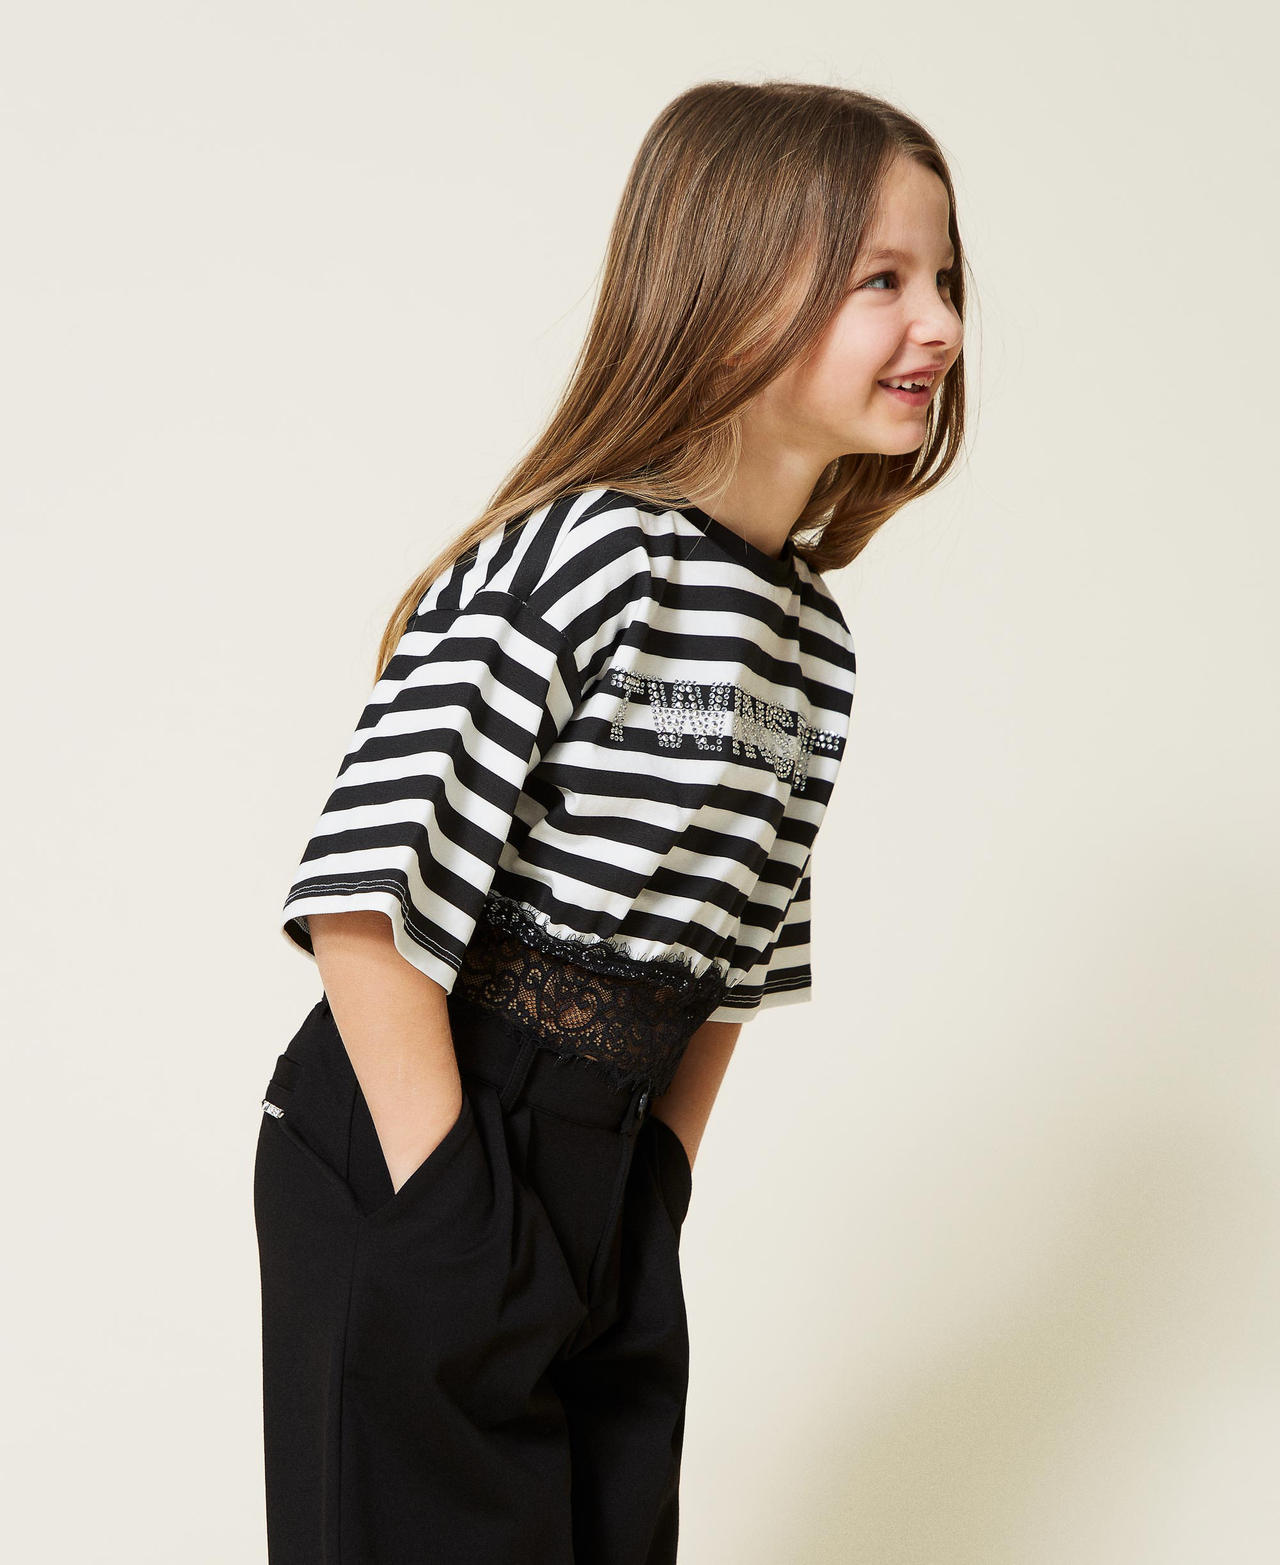 Striped t-shirt with logo and lace Off White / Black Stripe Print Girl 221GJ2244-02